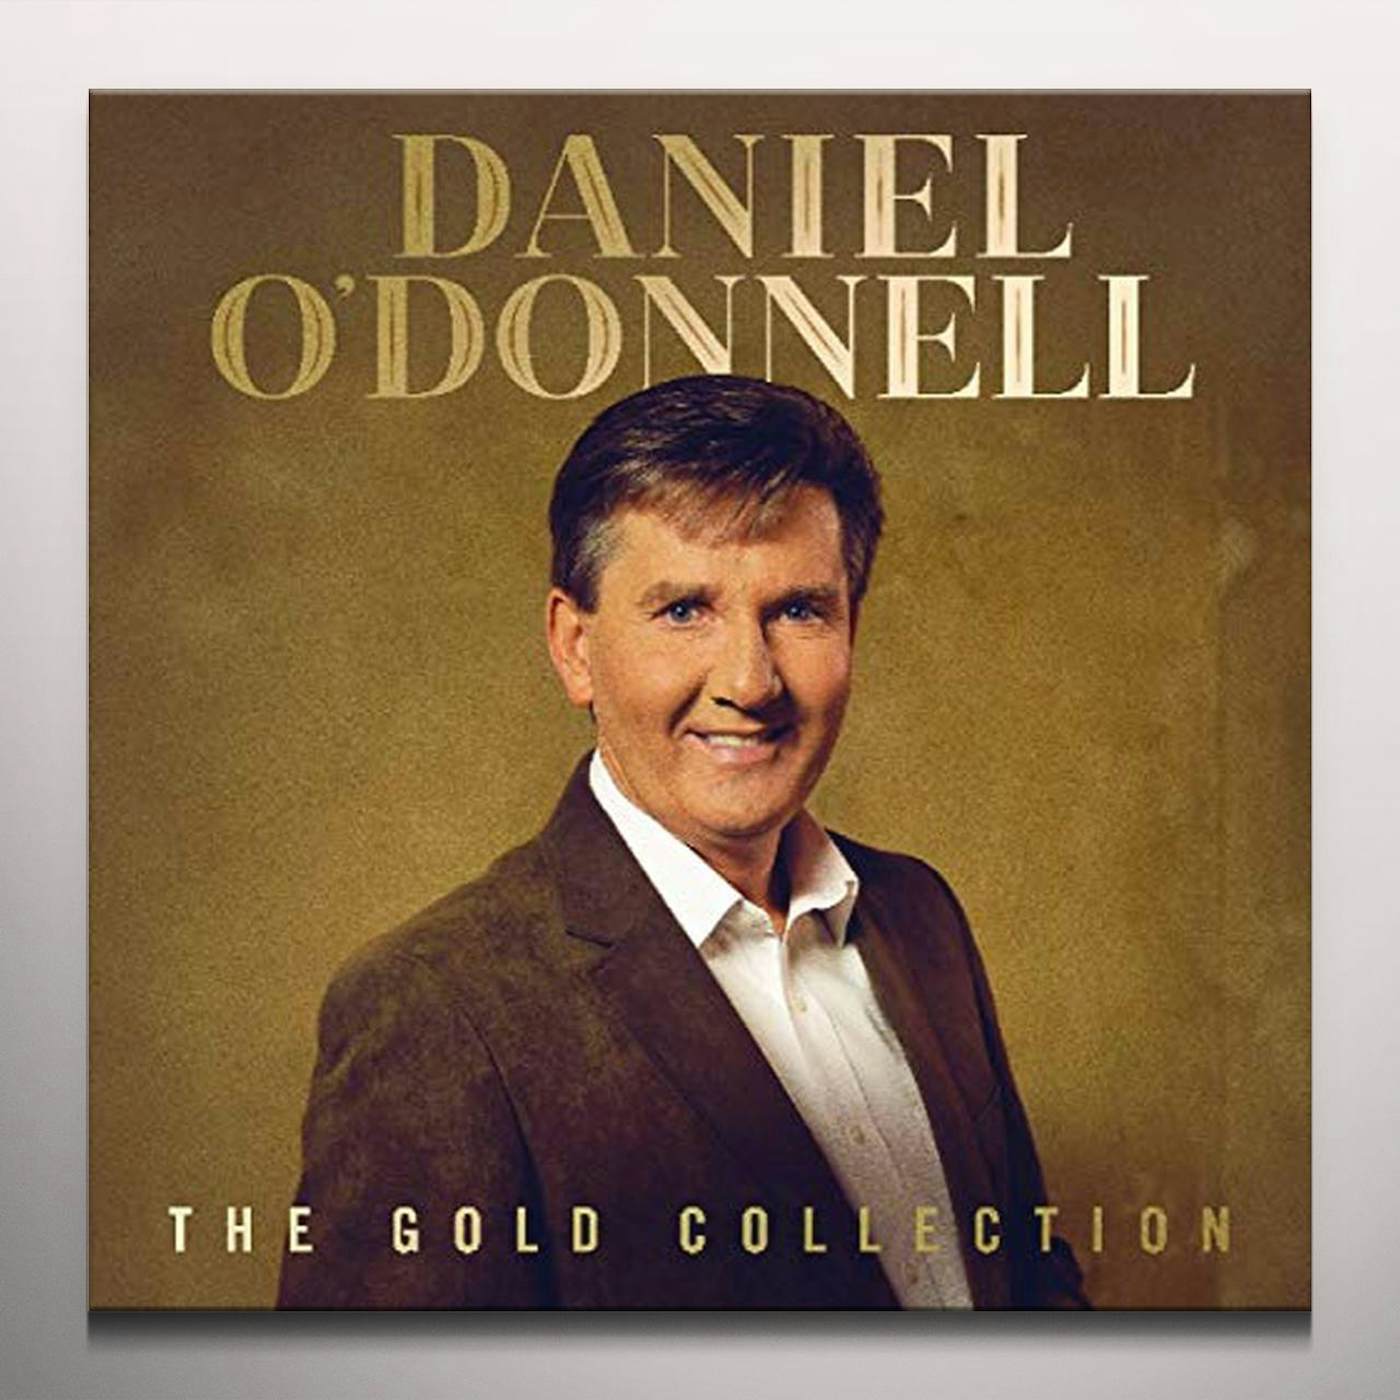 Daniel O'Donnell GOLD COLLECTION Vinyl Record